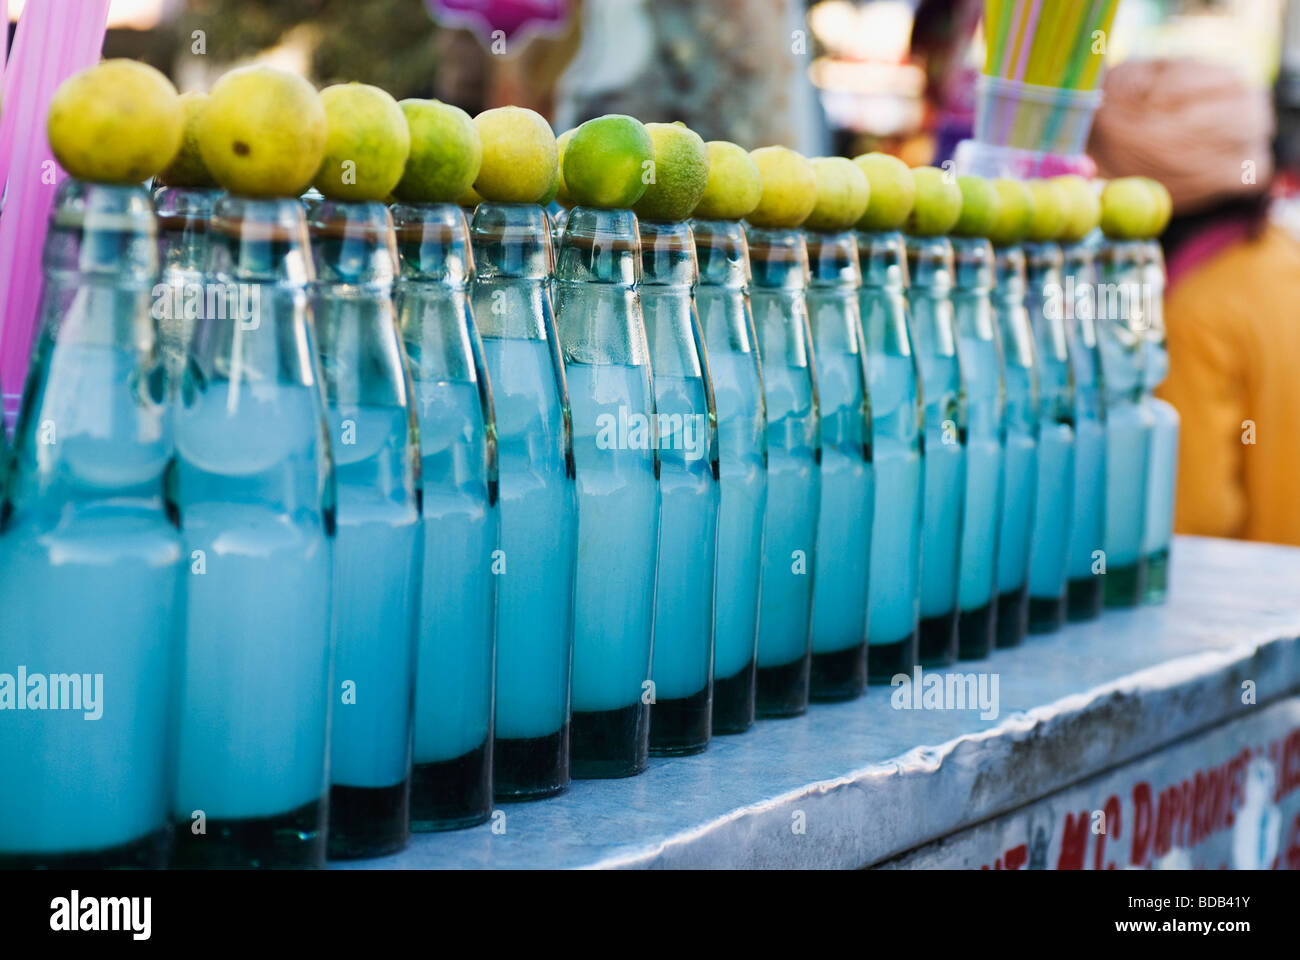 Cold drink bottles on a stall, New Delhi, India Stock Photo